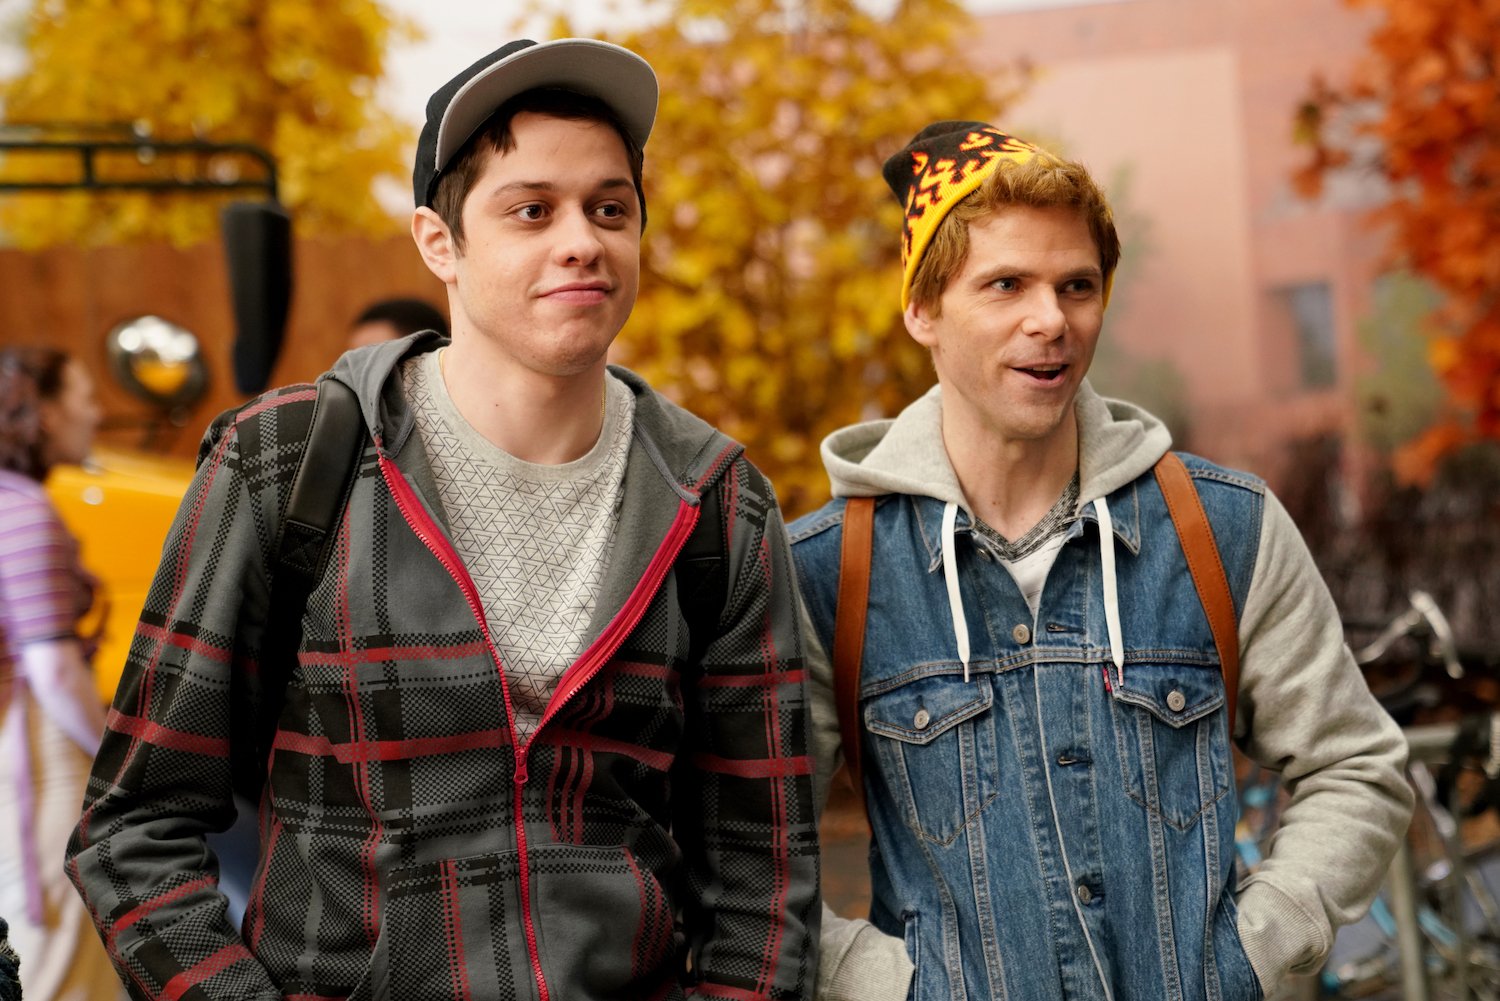 Pete Davidson and Mikey Day during 'The Loser' sketch on Saturday Night Live in 2021